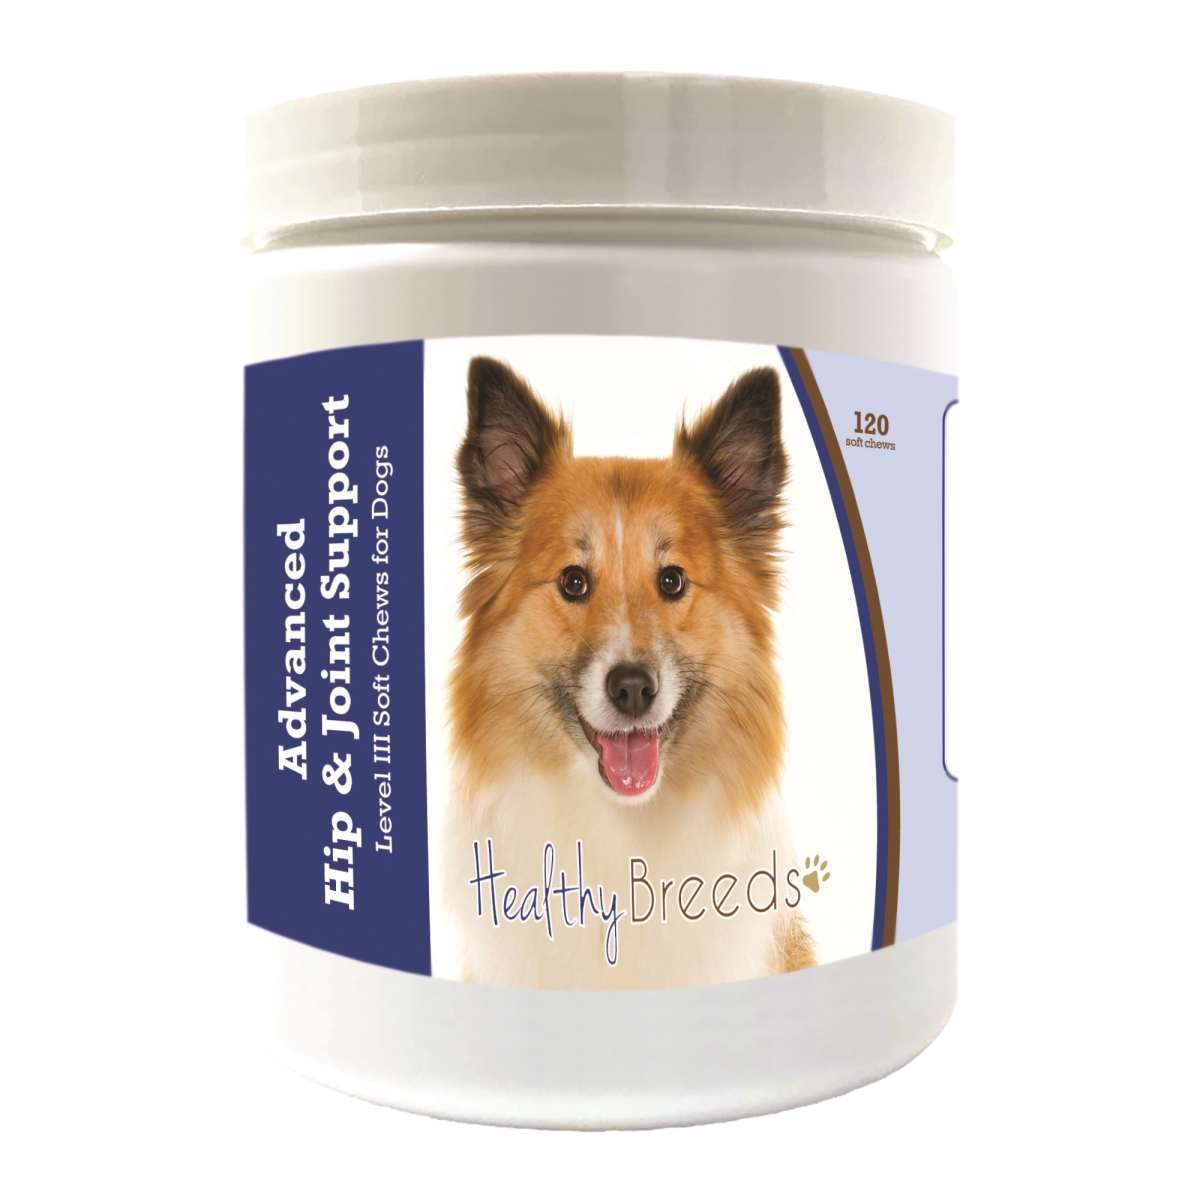 Picture of Healthy Breeds 192959898422 Icelandic Sheepdog Advanced Hip & Joint Support Level III Soft Chews for Dogs